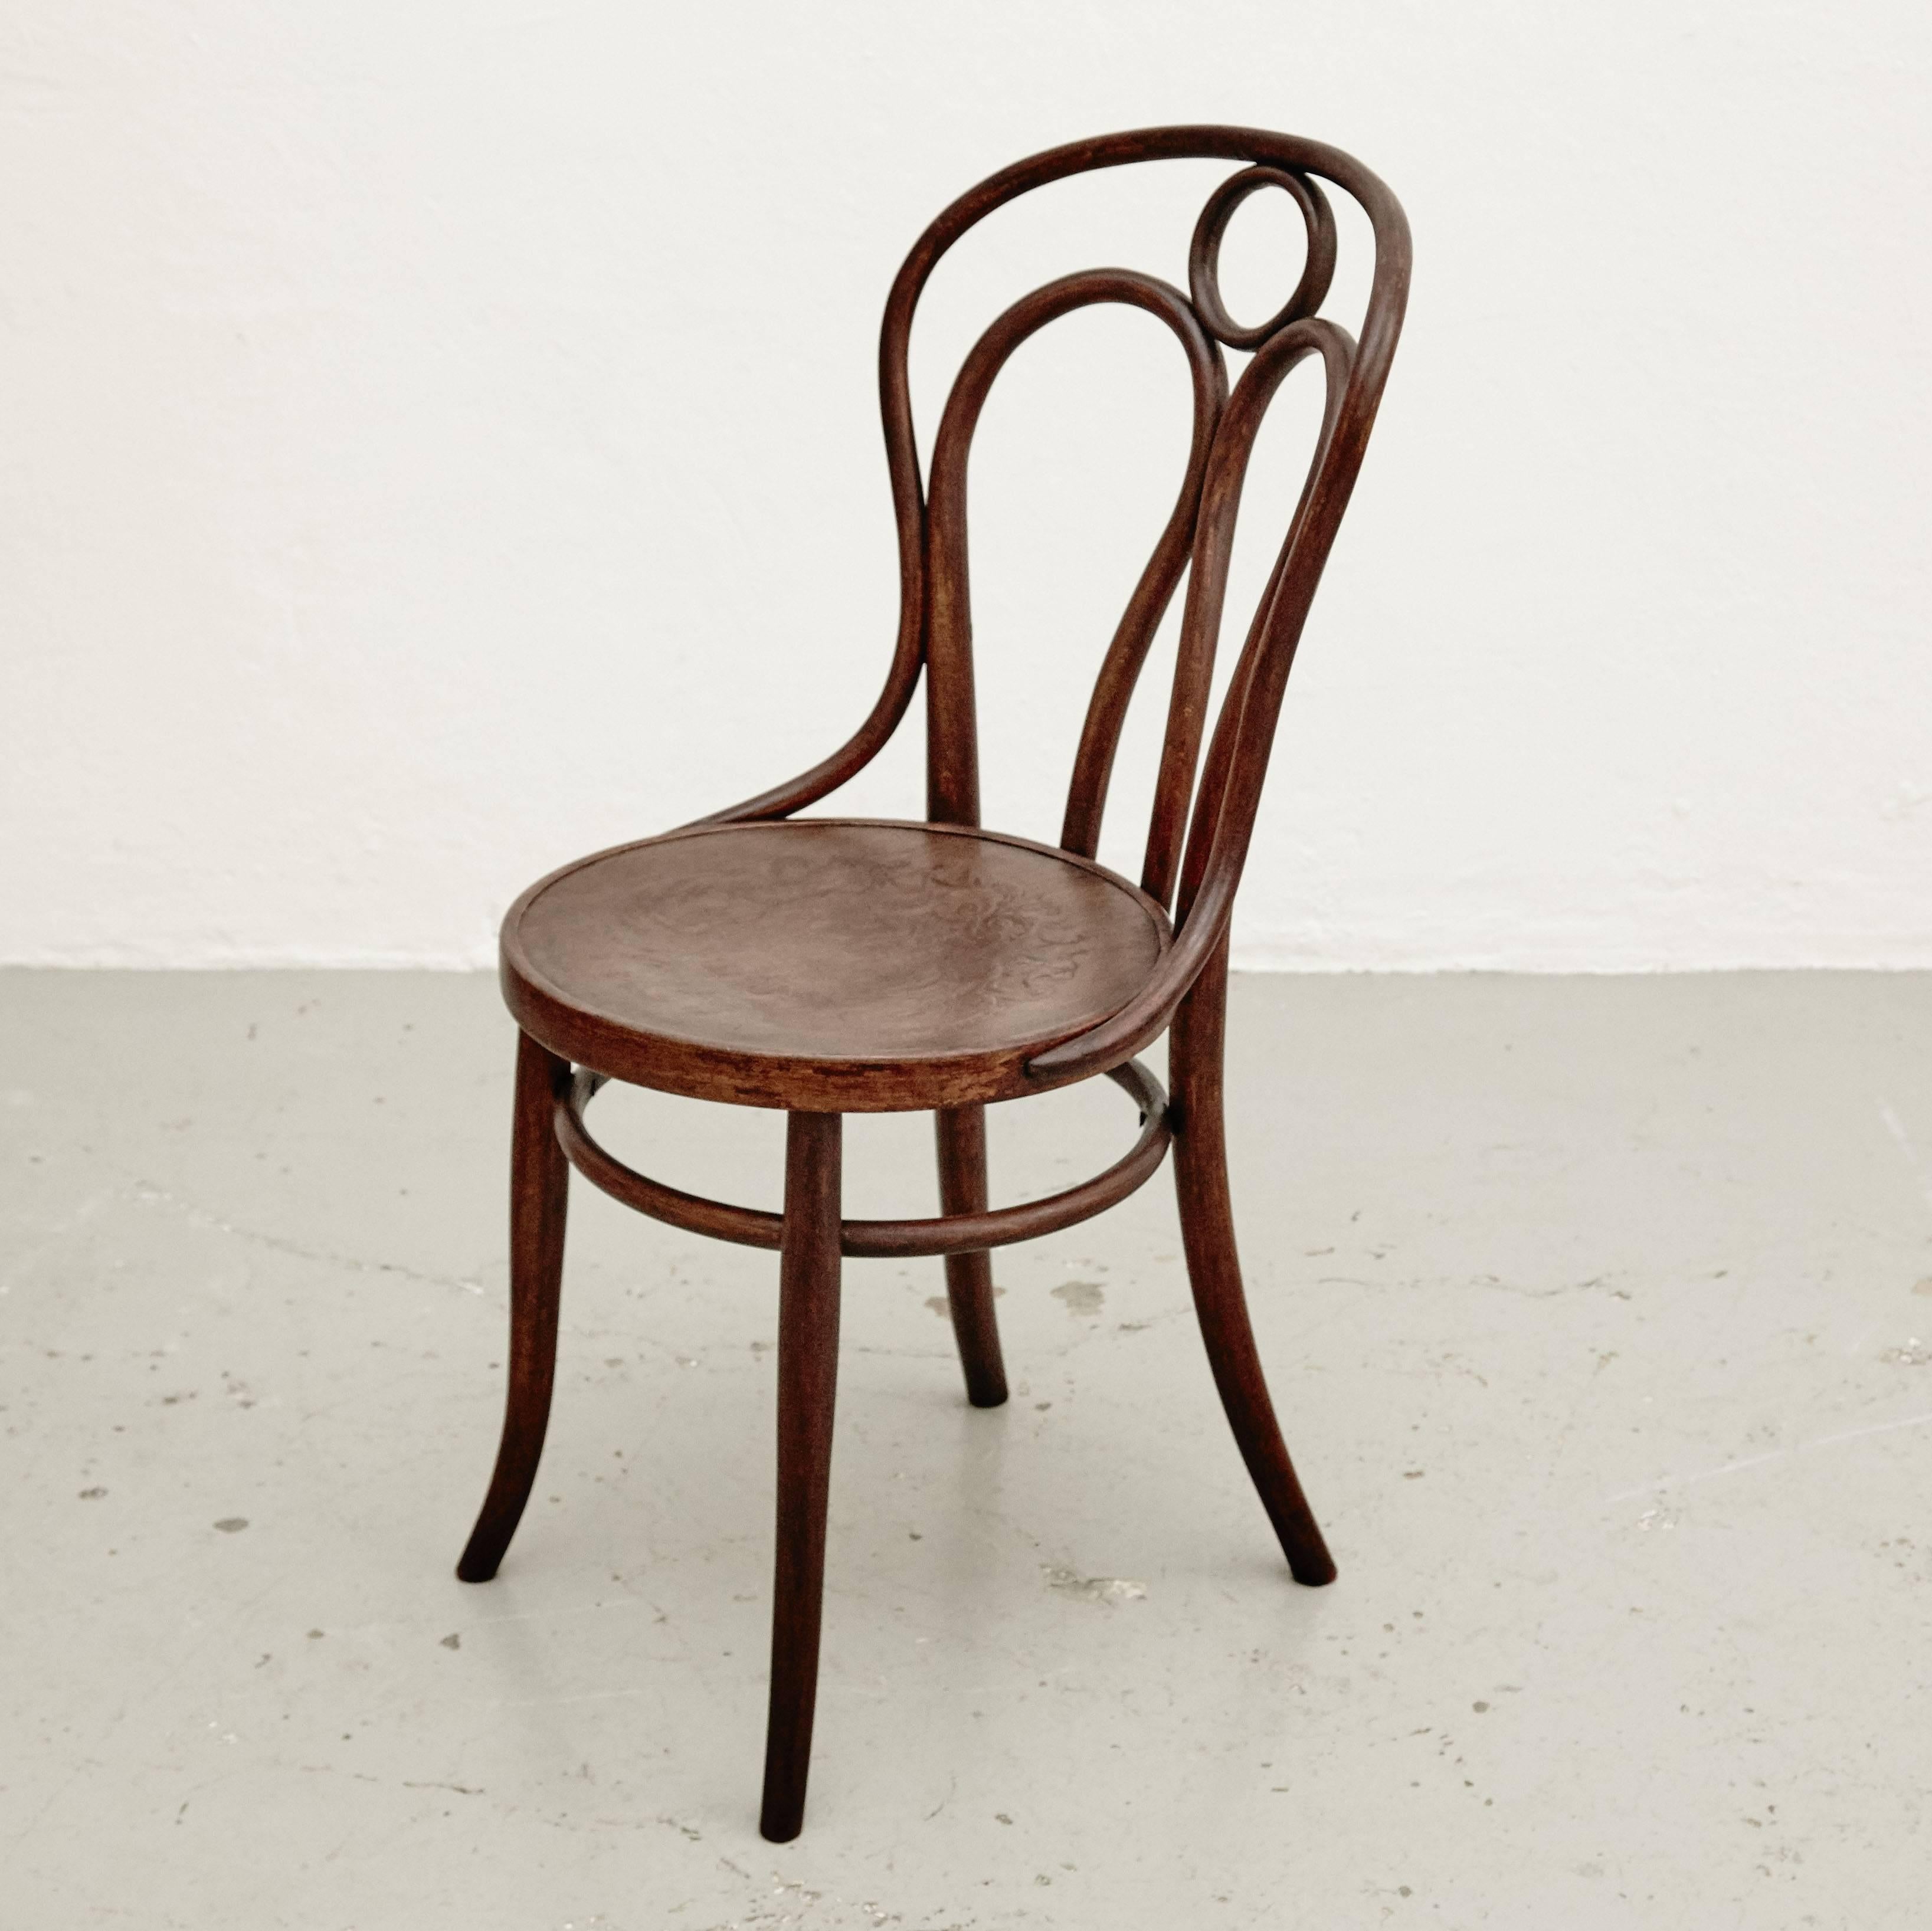 Bentwood Chair, designed by J & J.Khon around 1900 manufactured in Austria.

 In great original condition, with minor wear consistent with age and use, preserving a beautiful patina.

Jacob & Josef Kohn, also known as J. & J. Kohn, was an